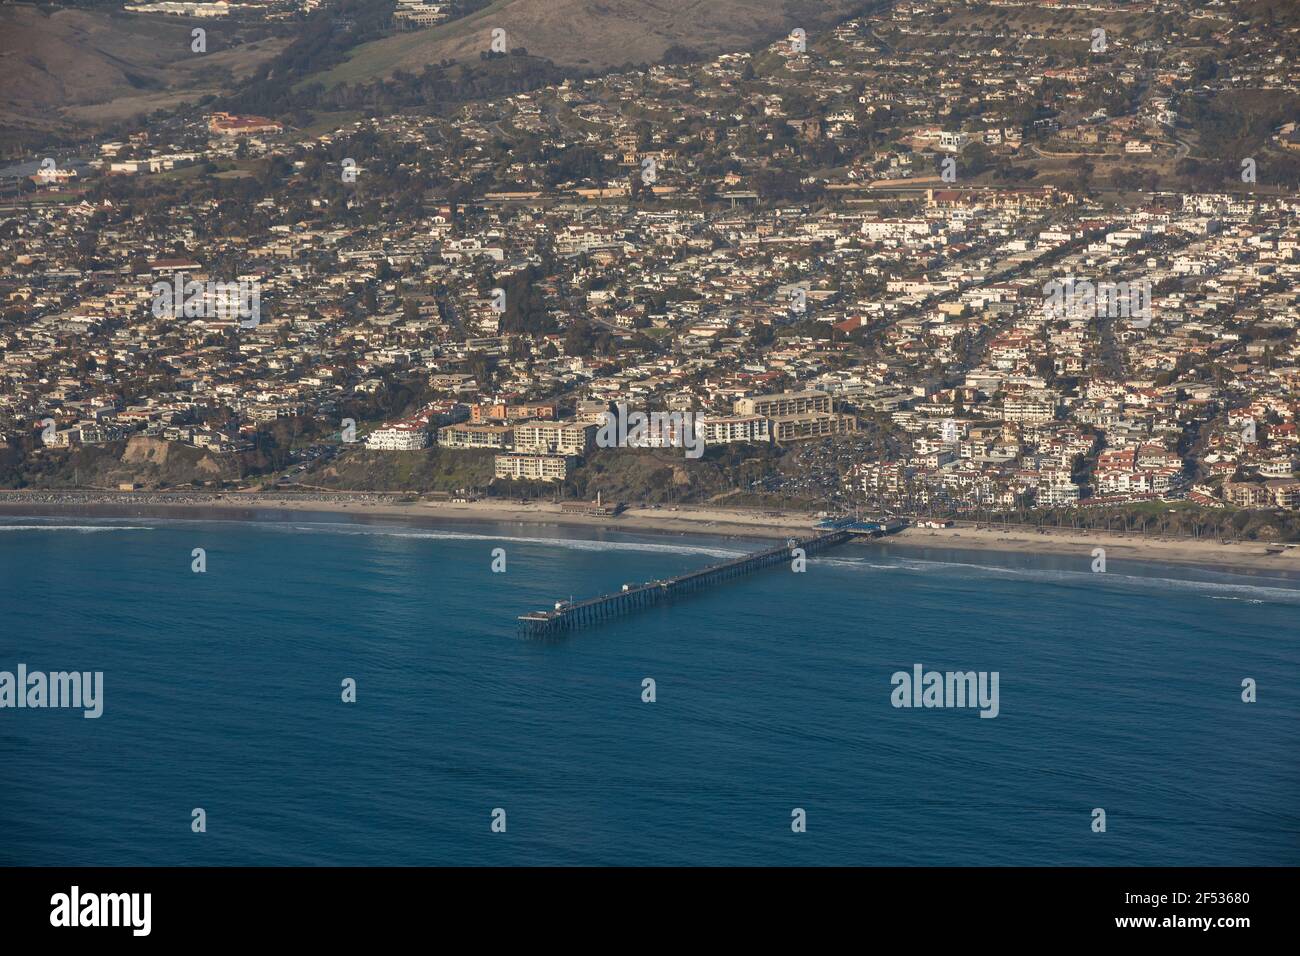 Daytime aerial view of the beach and downtown city area of San Clemente, California, USA. Stock Photo